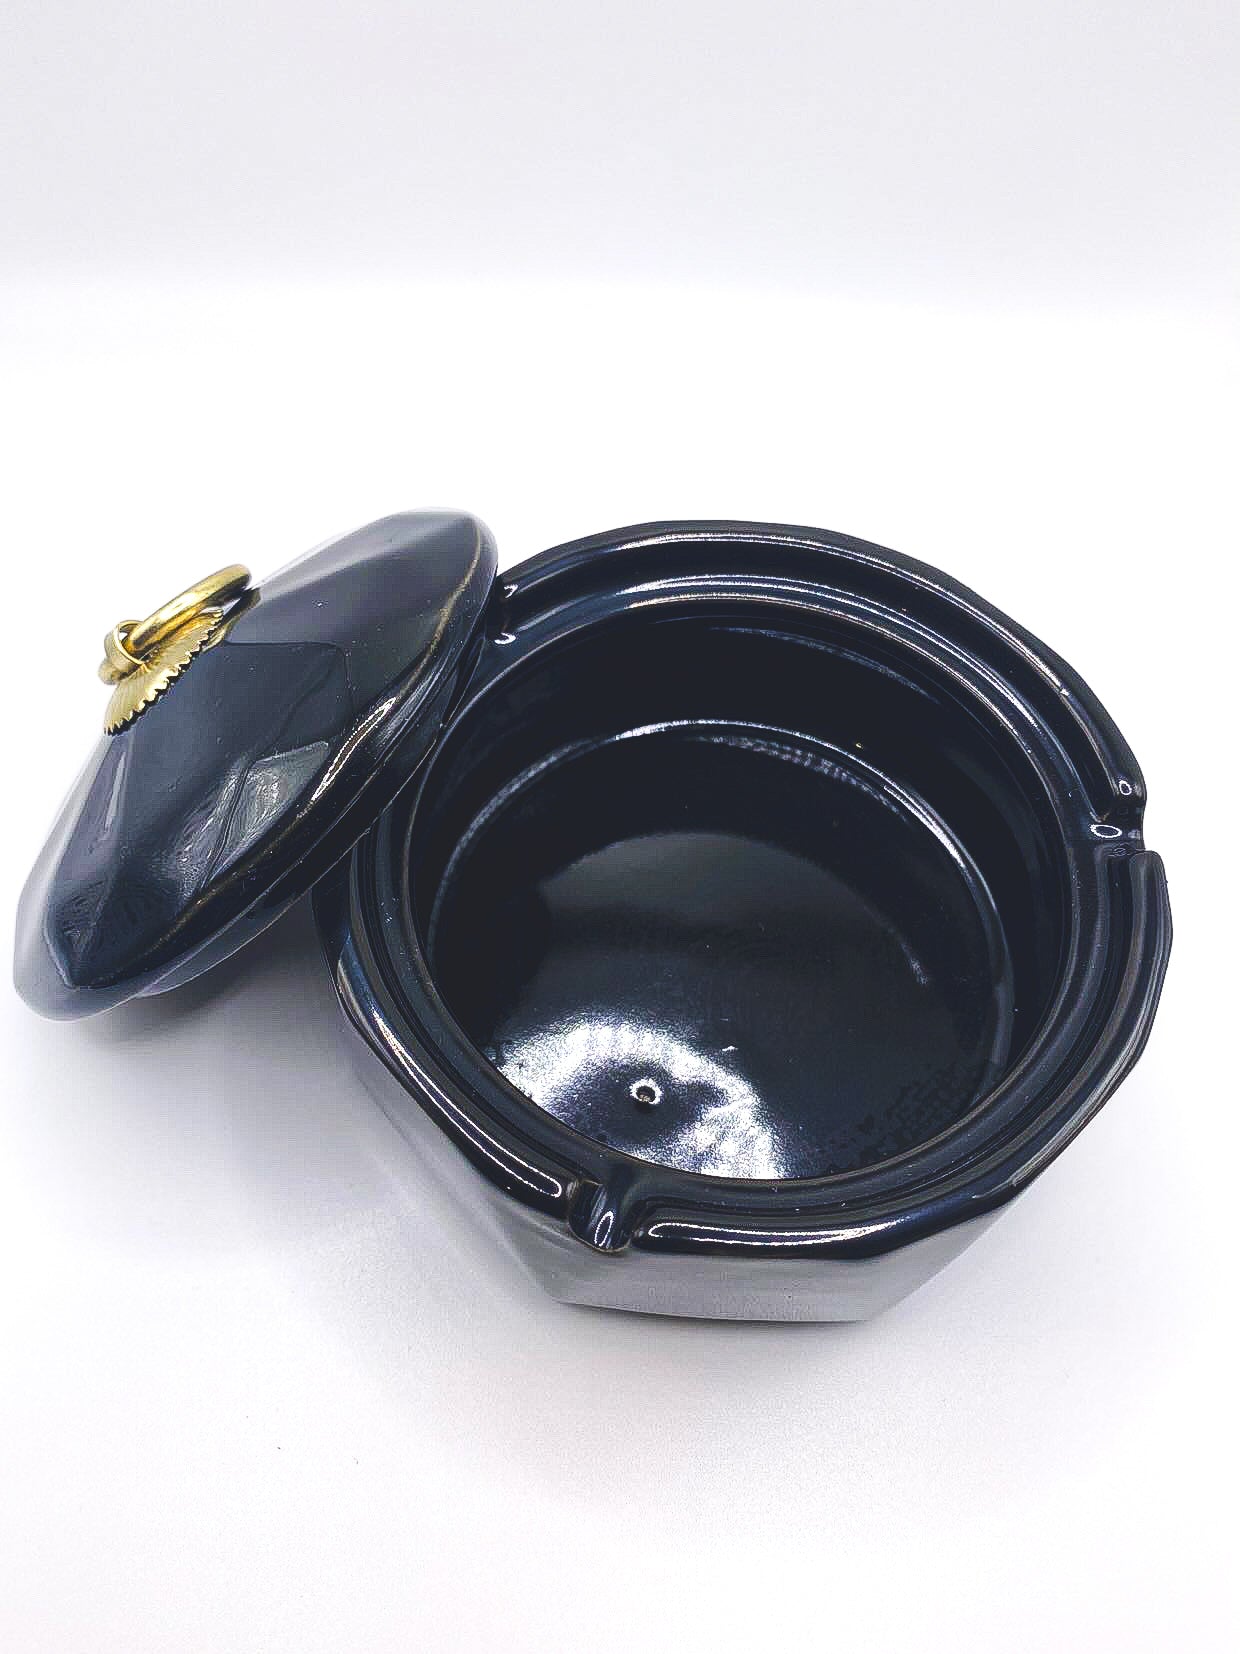  moisture Ash Tray sSet Purple Clay Ceramic Ashtray with Lid  Creative Hotel Supplies Office Bar Household Cigarette Tray (Color : B,  Size : Large) : Home & Kitchen